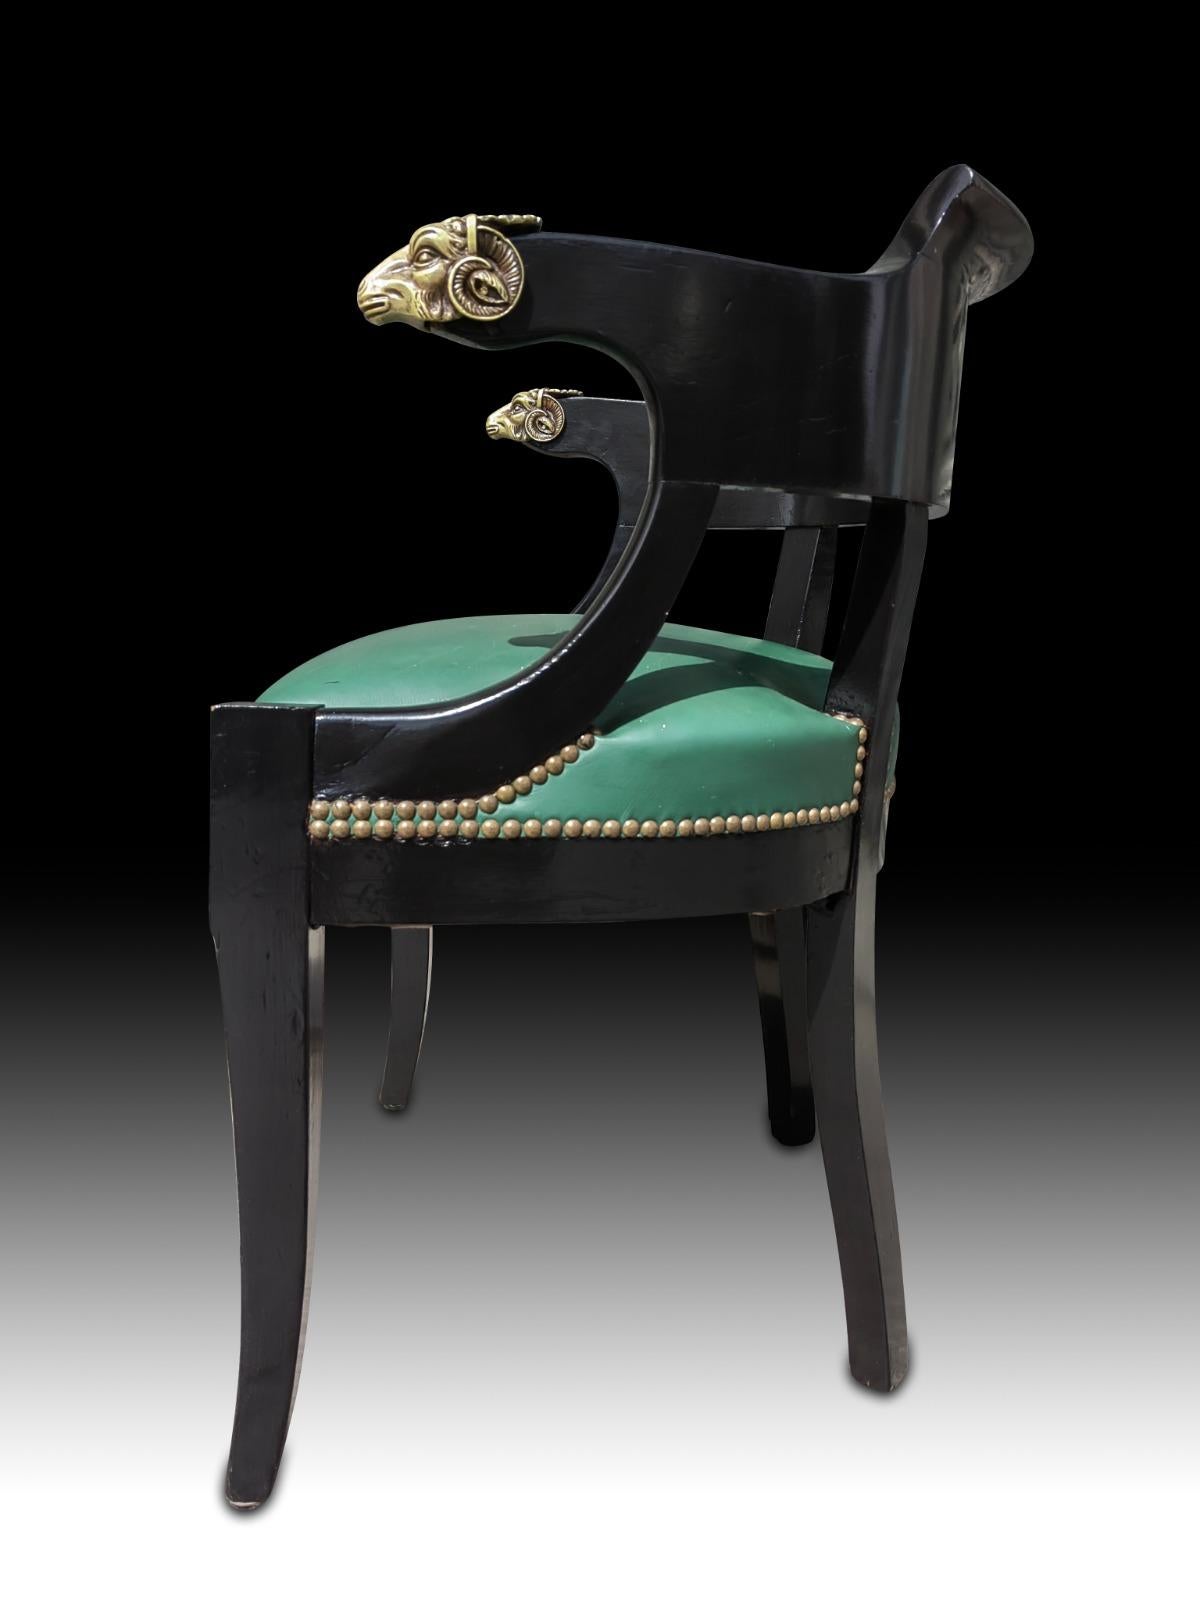 XIX century desk chair. Pretty xix century armchair ebonized and upholstered in green leather. The armrests have 2 chiselled bronze ram's head.
good condition.